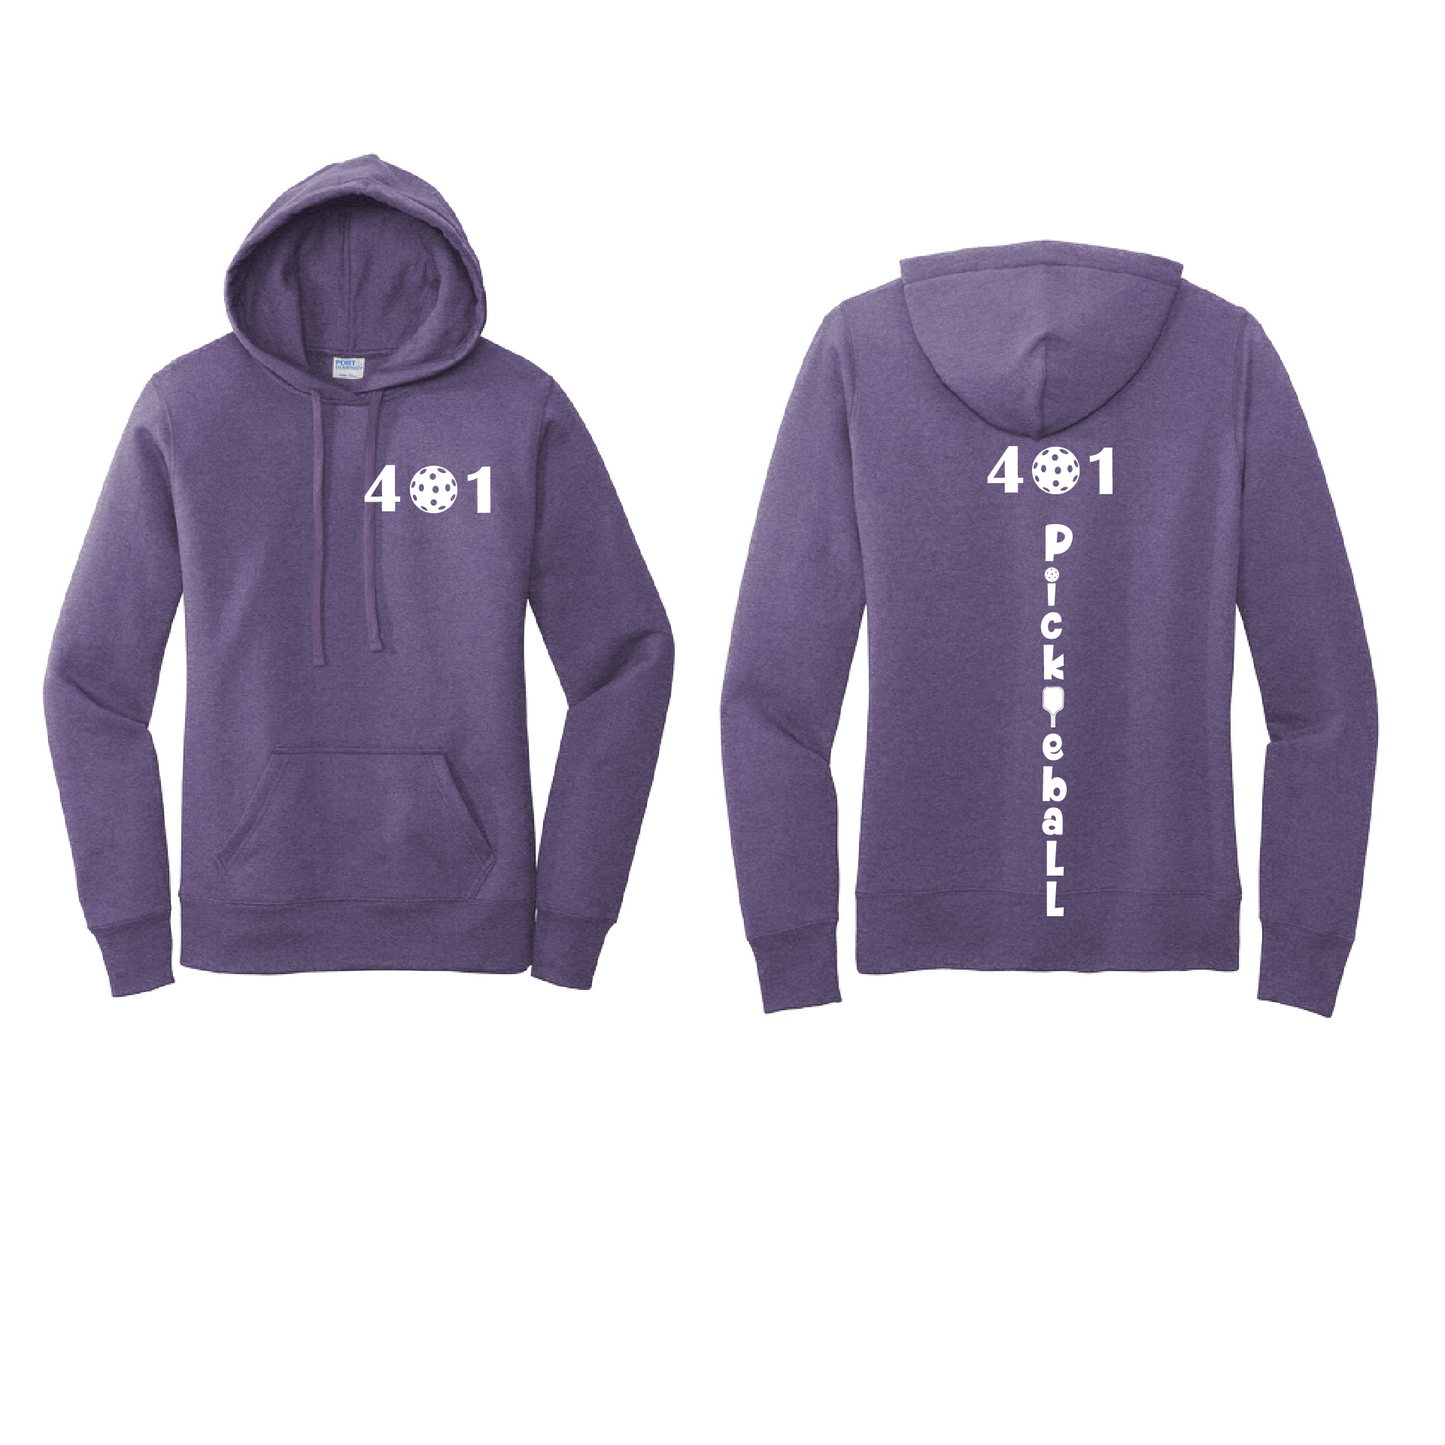 Design: 401 Pickleball  Women's Hooded pullover Sweatshirt: 50/50 Cotton/Poly fleece.   Turn up the volume in this Women's Sweatshirts with its perfect mix of softness and attitude. Ultra soft lined inside with a lined hood also. This is fitted nicely for a women's figure. Front pouch pocket.